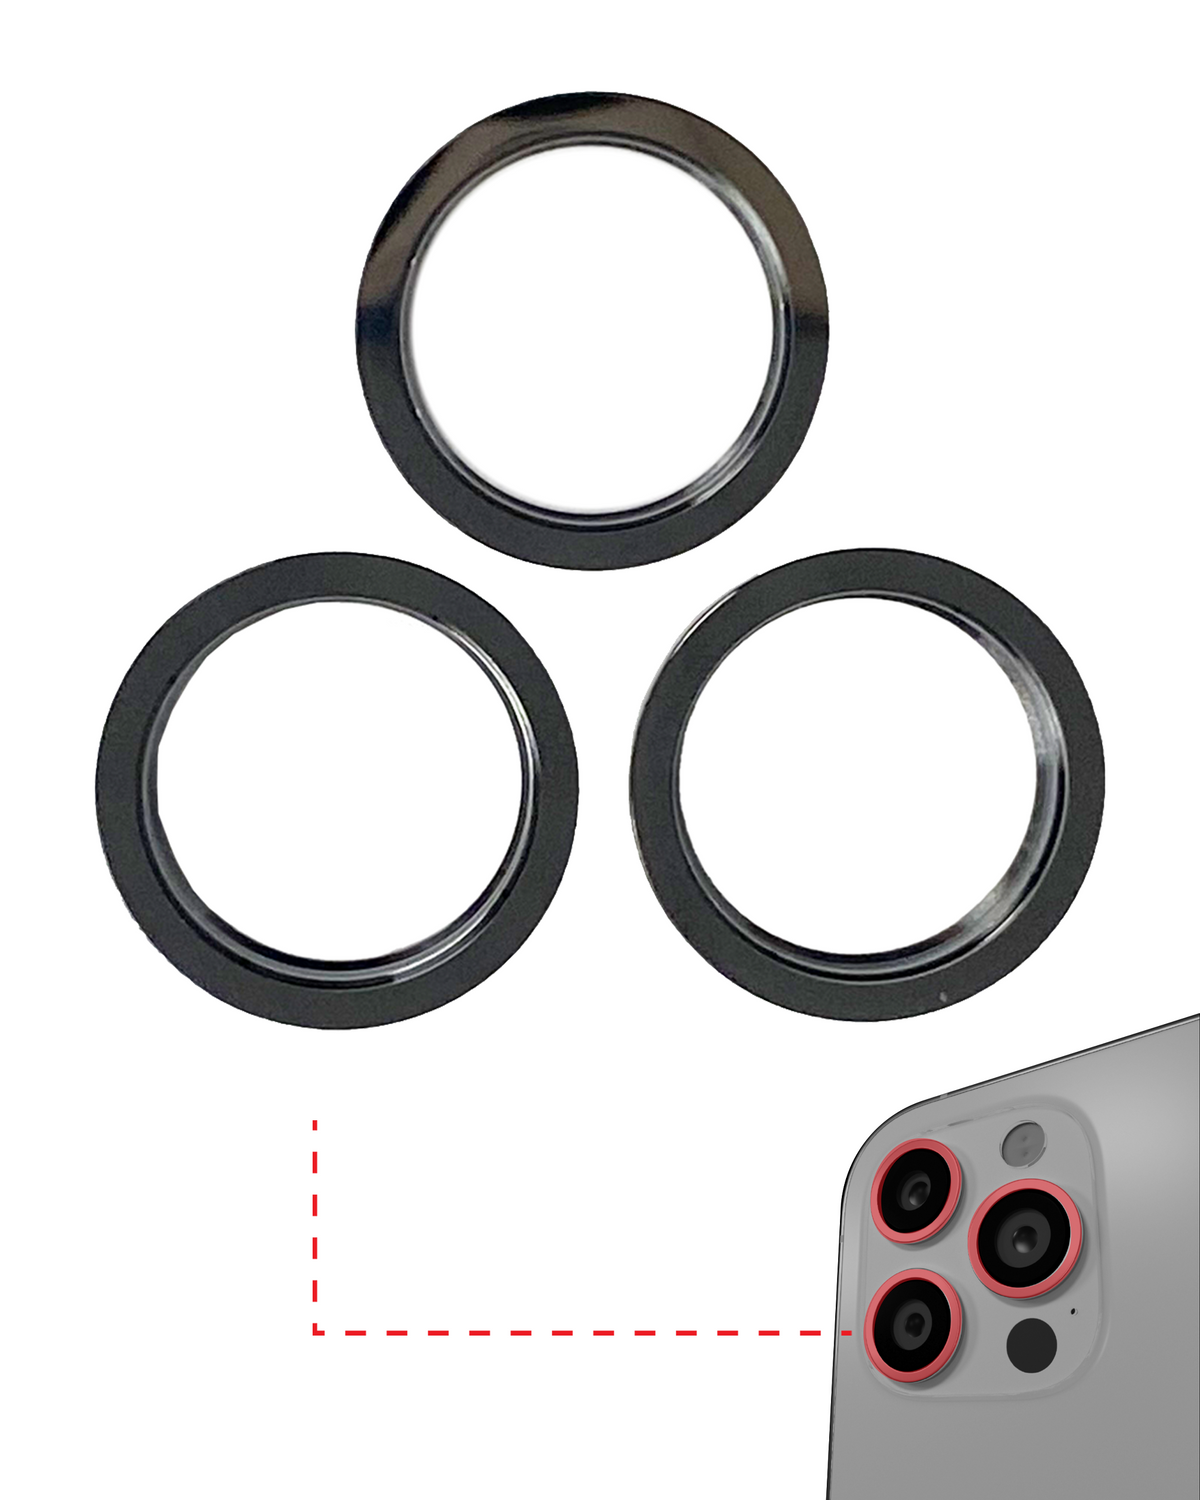 GRAPHITE - BACK CAMERA BEZEL RING ONLY (3 PIECE SET) FOR IPHONE 12 PRO  (10 PACK)